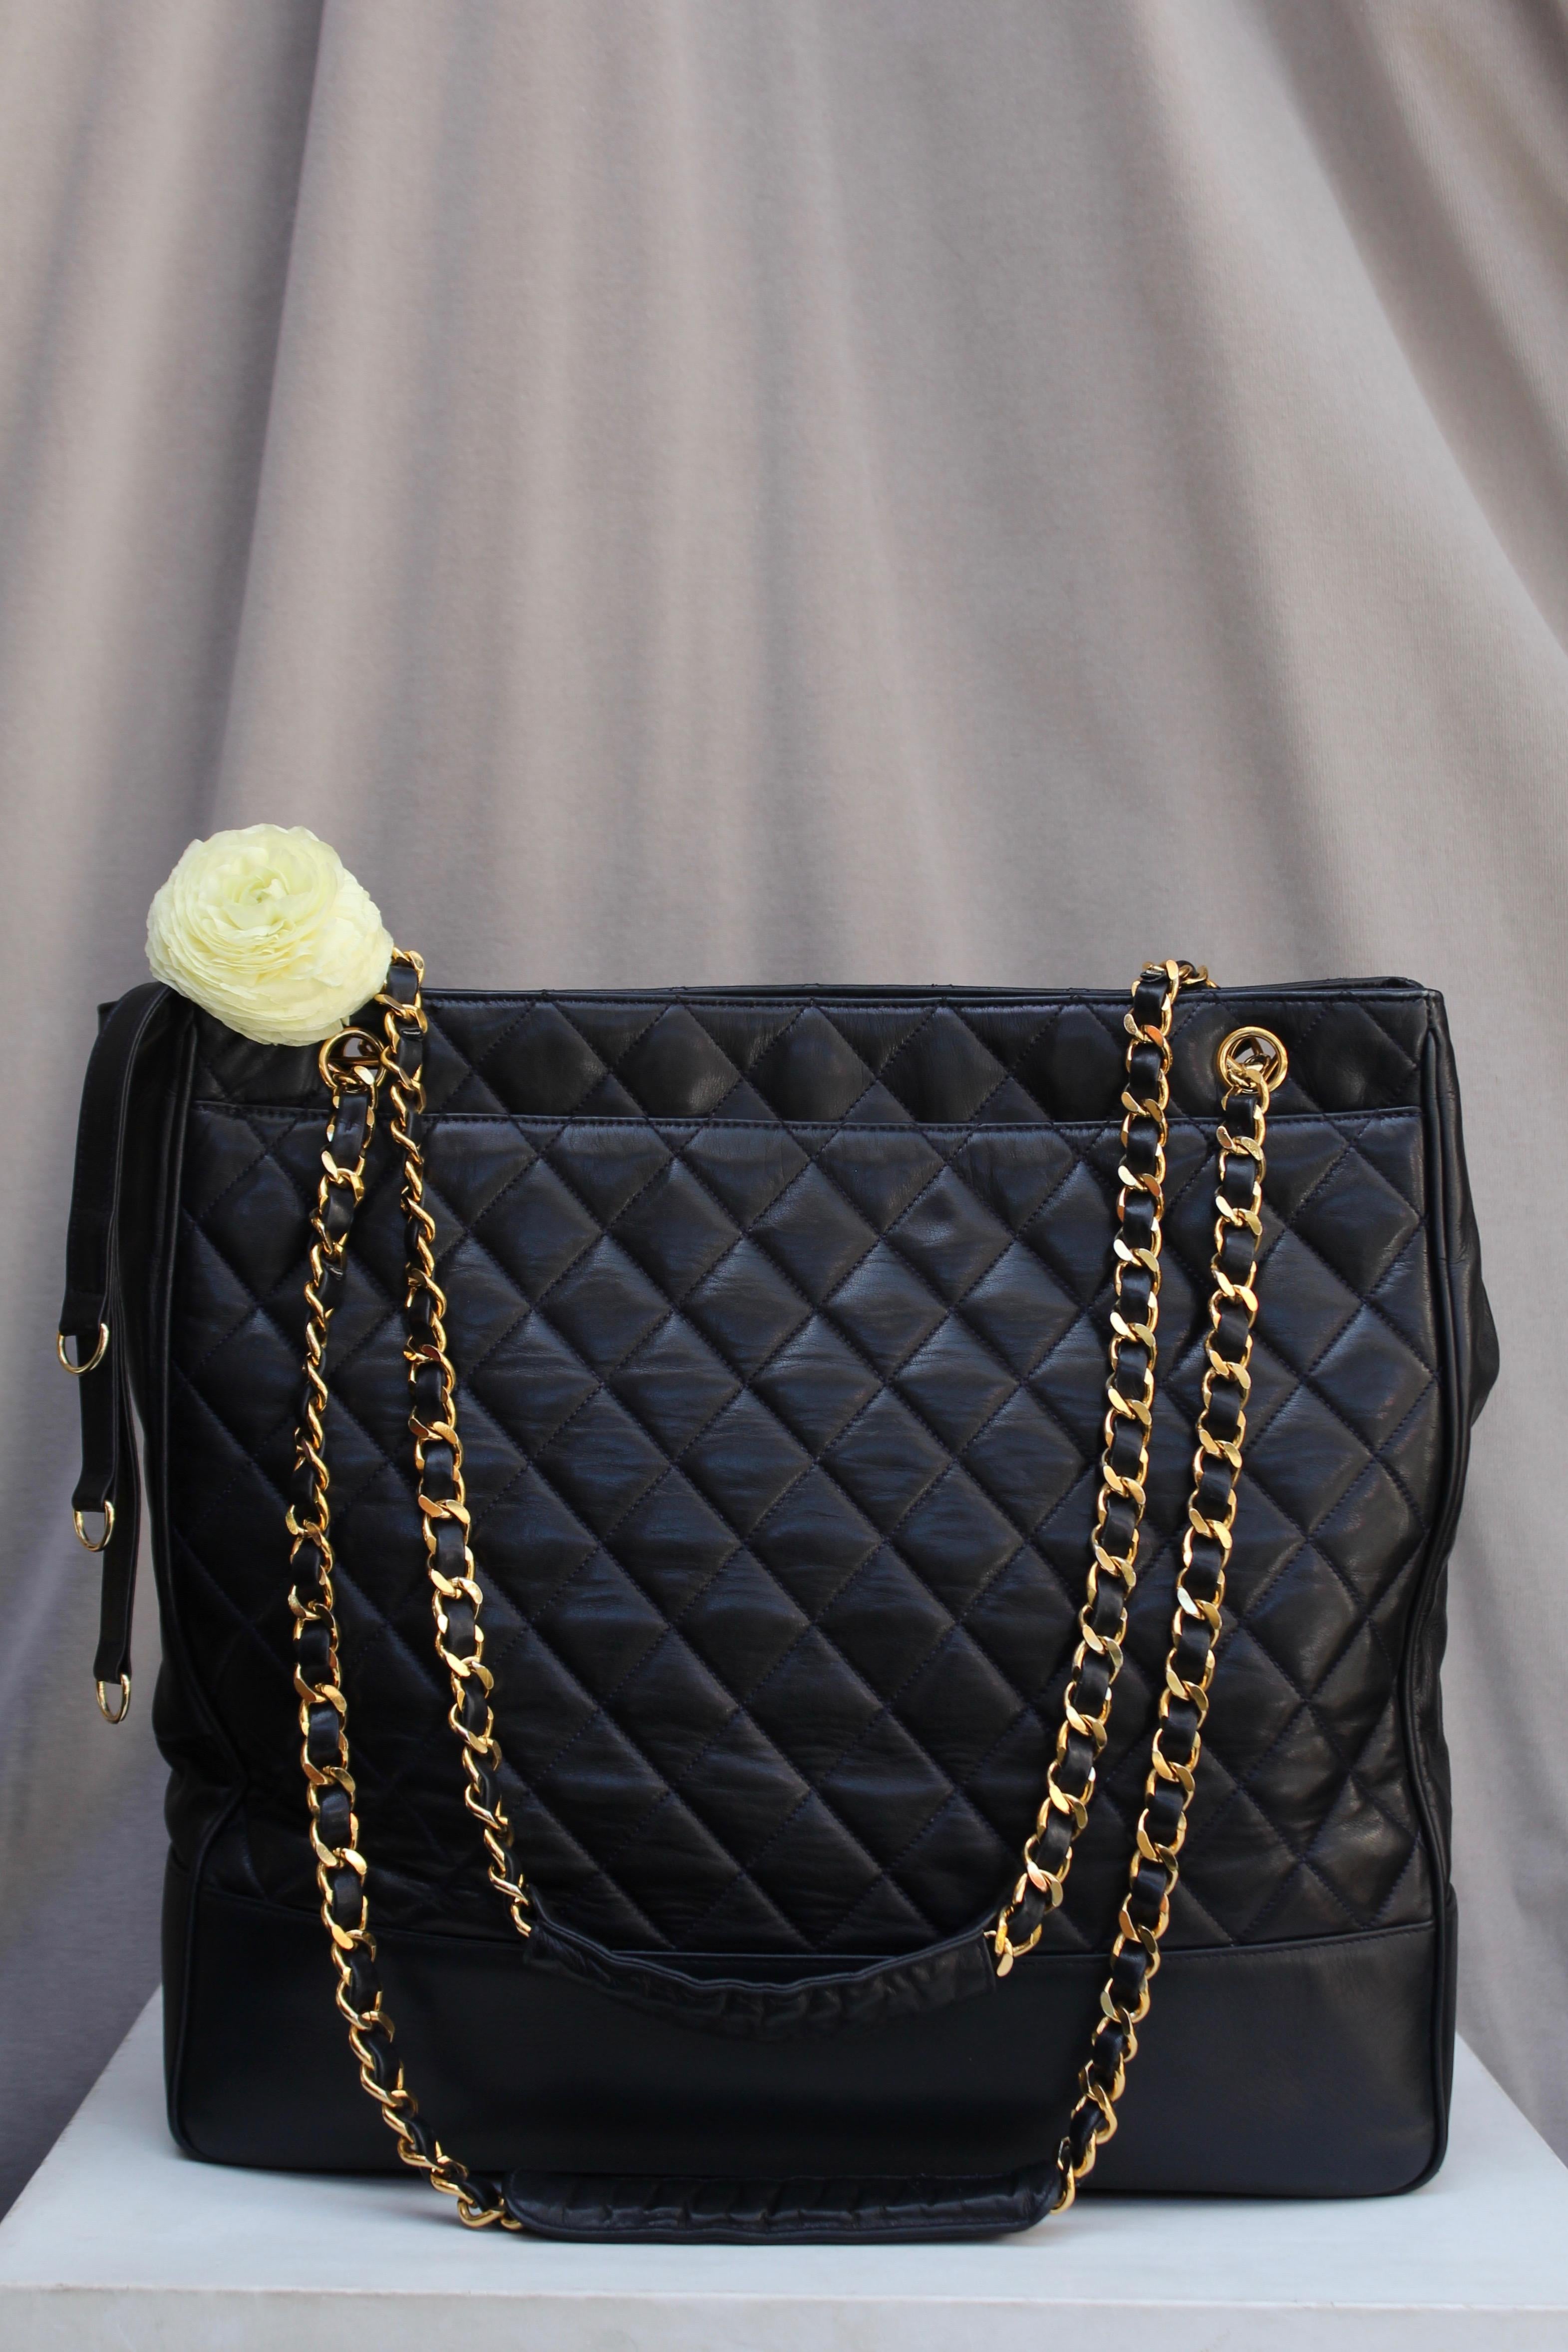 CHANEL (Made in Italy) Great vintage shopping bag in quilted black leather. It features two long gilded metal handles entwined with black leather. In the middle of the handles, a leather yokes provides comfort to the shoulder.

On either side of the